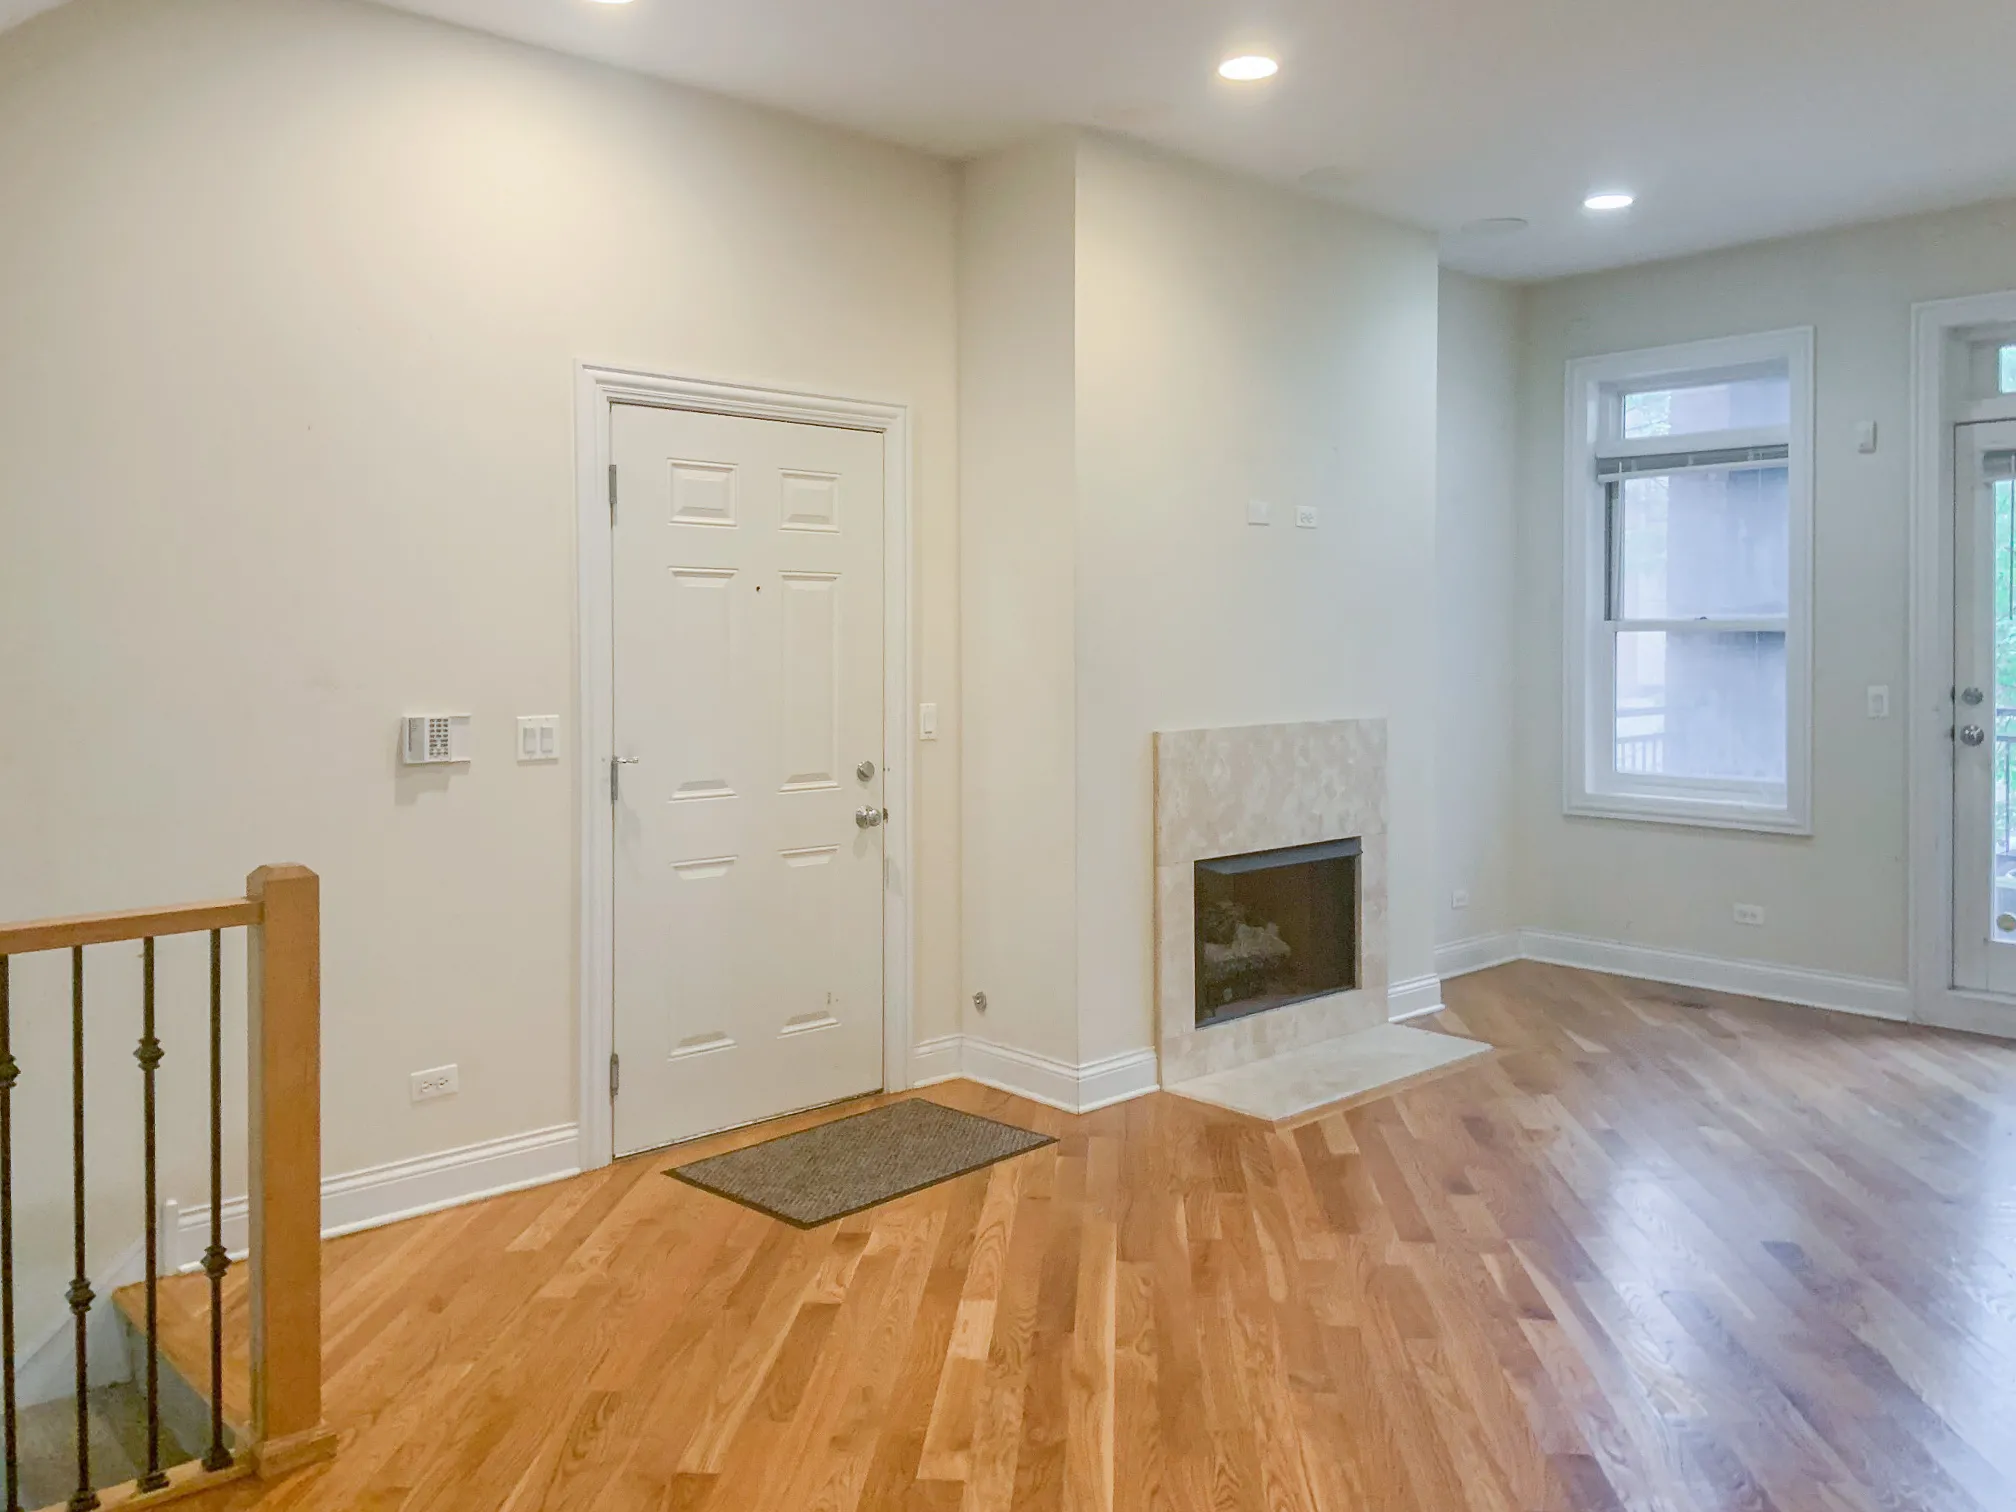 2334 N Greenview Ave 60614 60614-unit#1-Chicago-IL